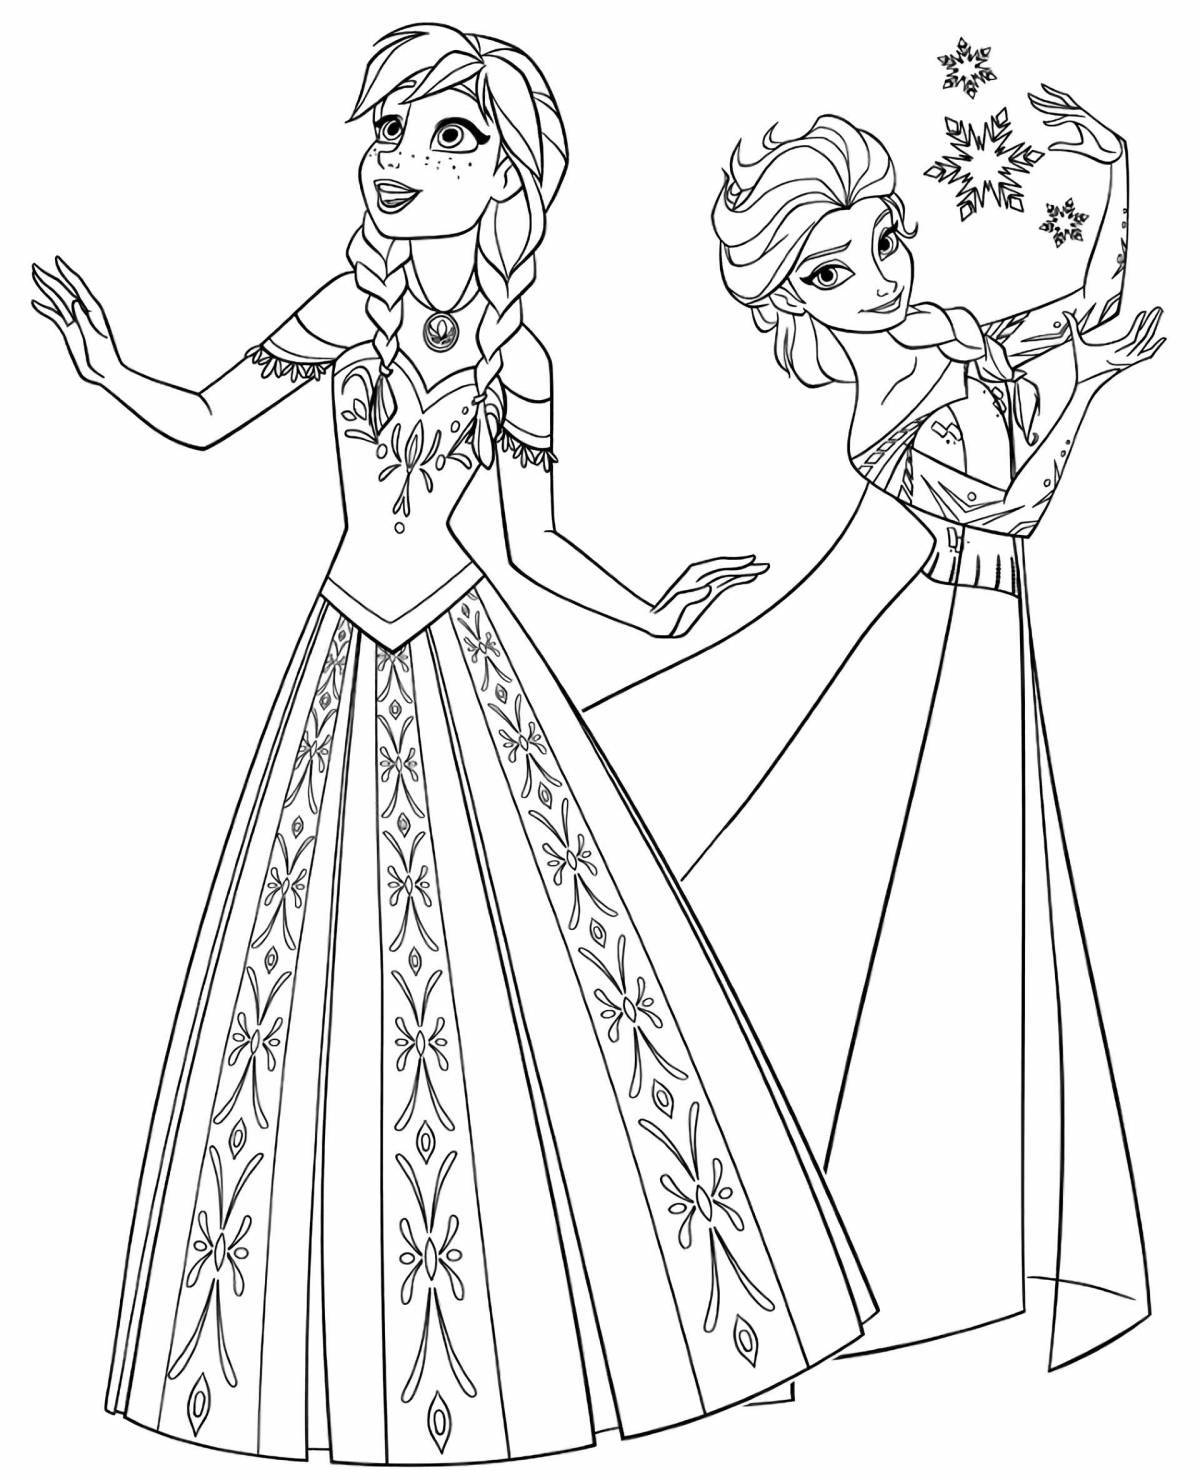 Fun coloring elsa and anna for kids